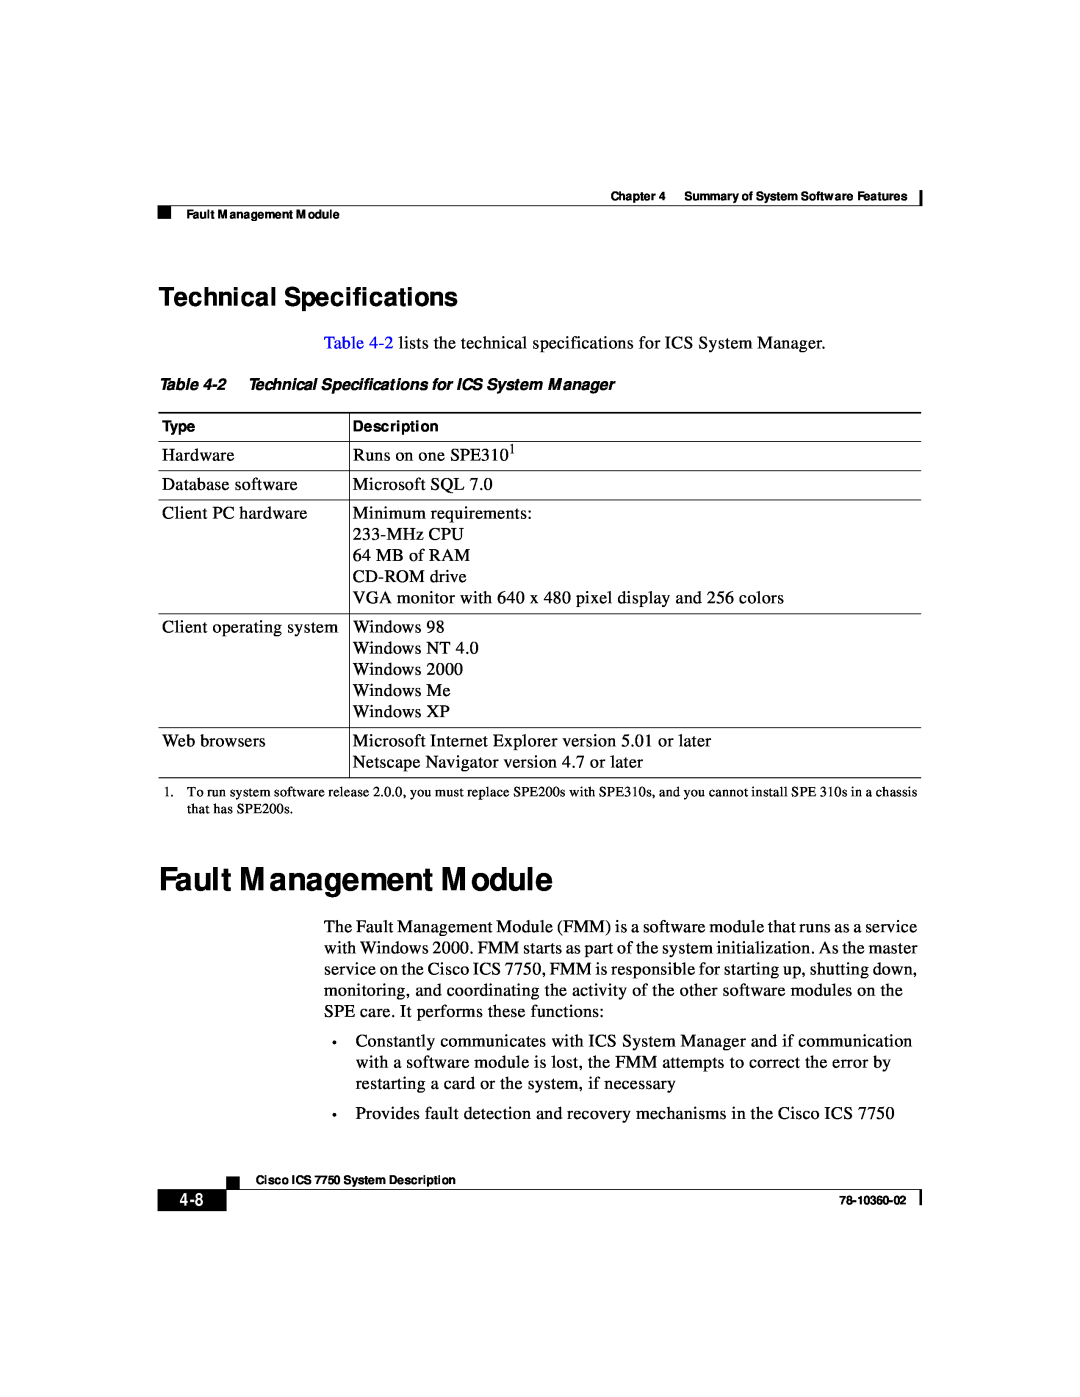 Cisco Systems ICS-7750 manual Fault Management Module, Technical Specifications 